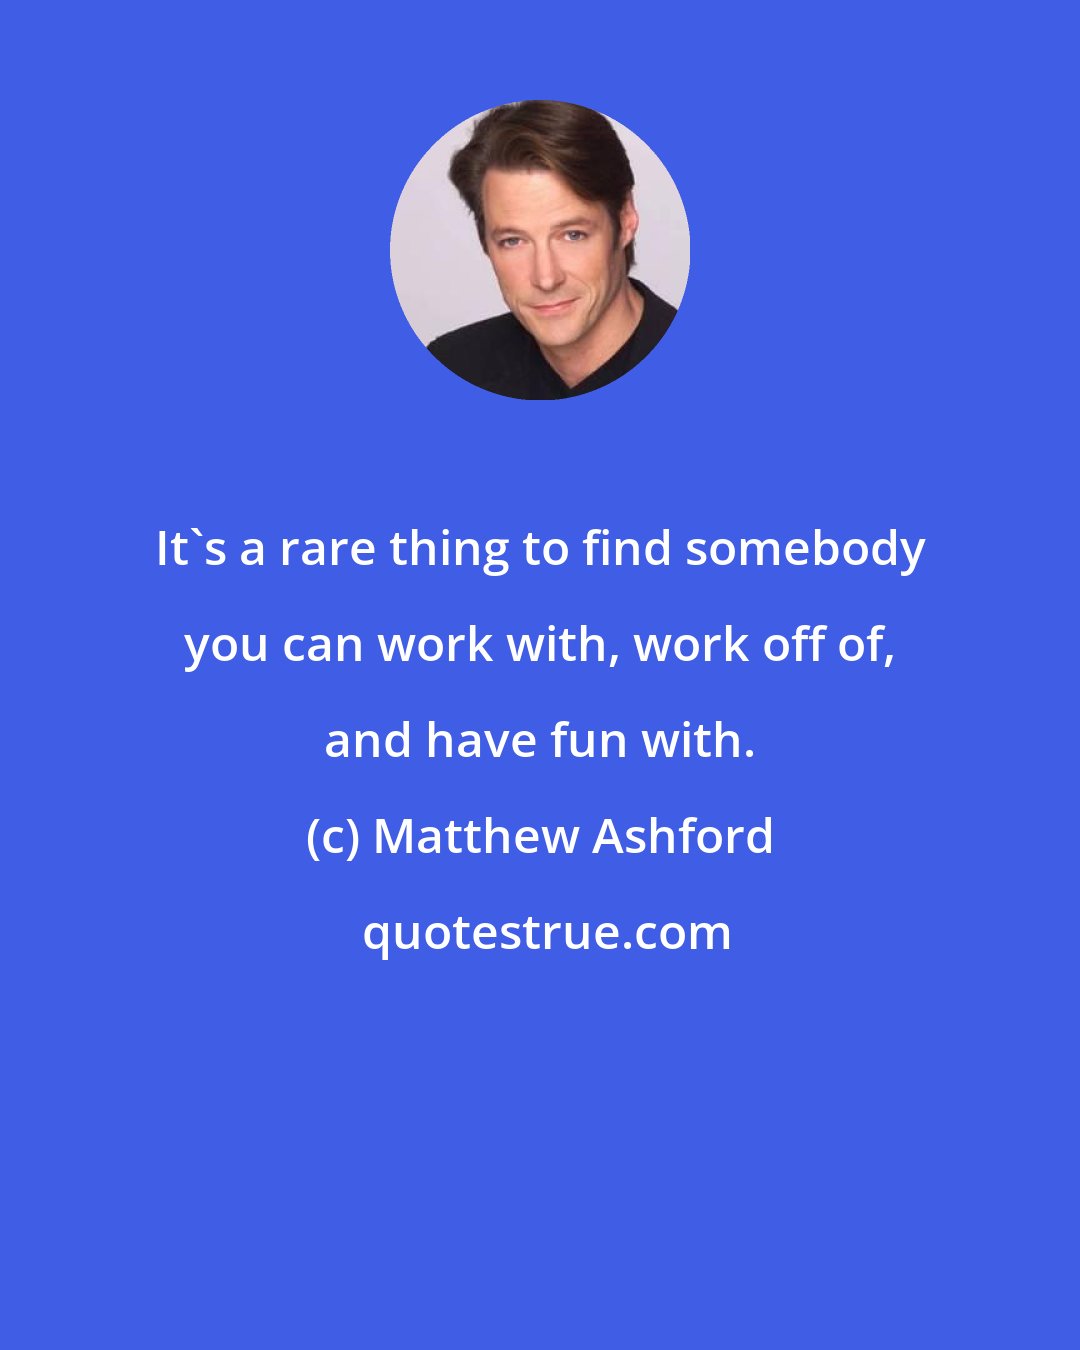 Matthew Ashford: It's a rare thing to find somebody you can work with, work off of, and have fun with.